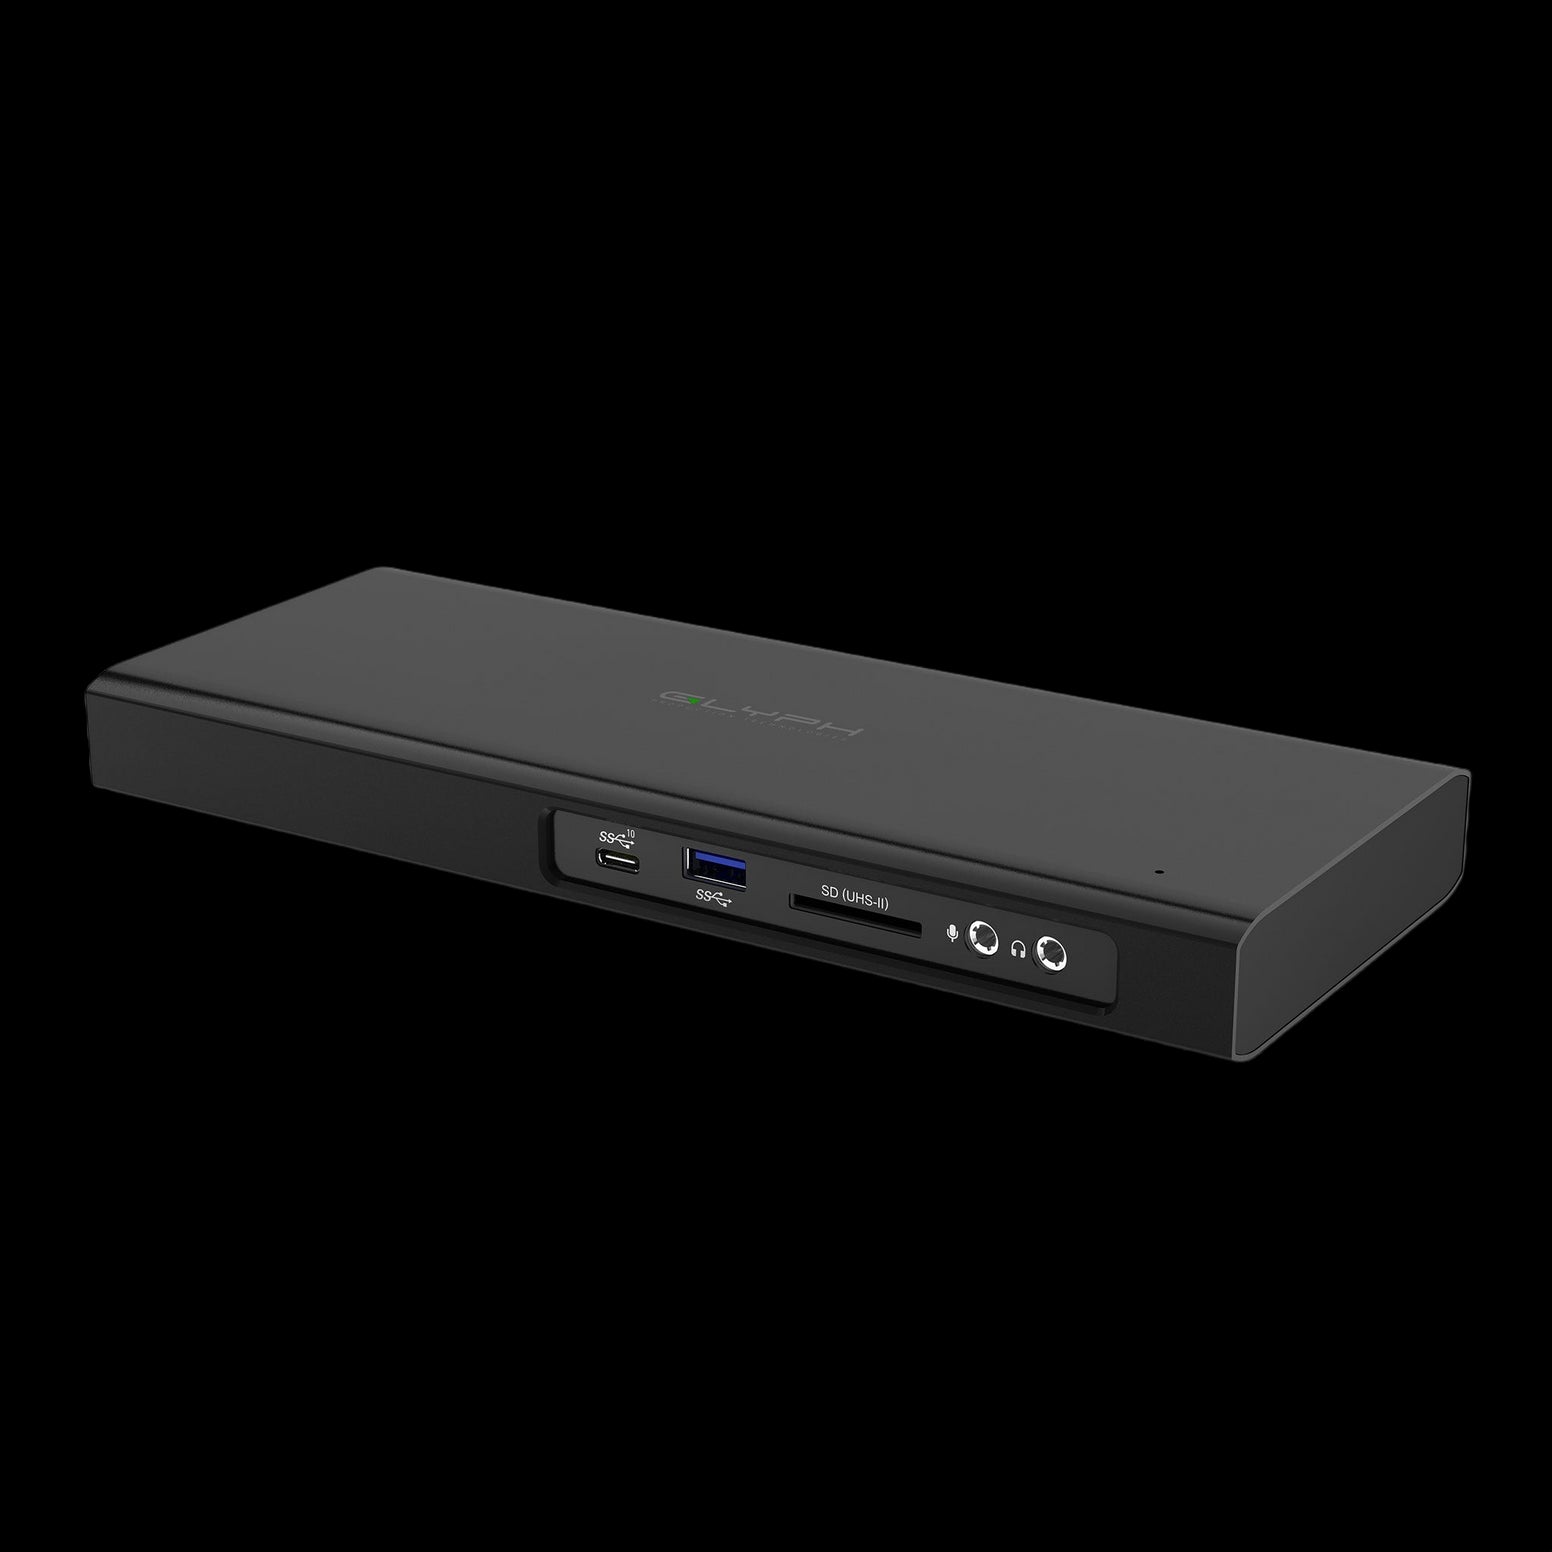 Glyph Thunderbolt 3 NVMe Dock Thunderbolt 3 40 GB/s - No SSD - Discontinued